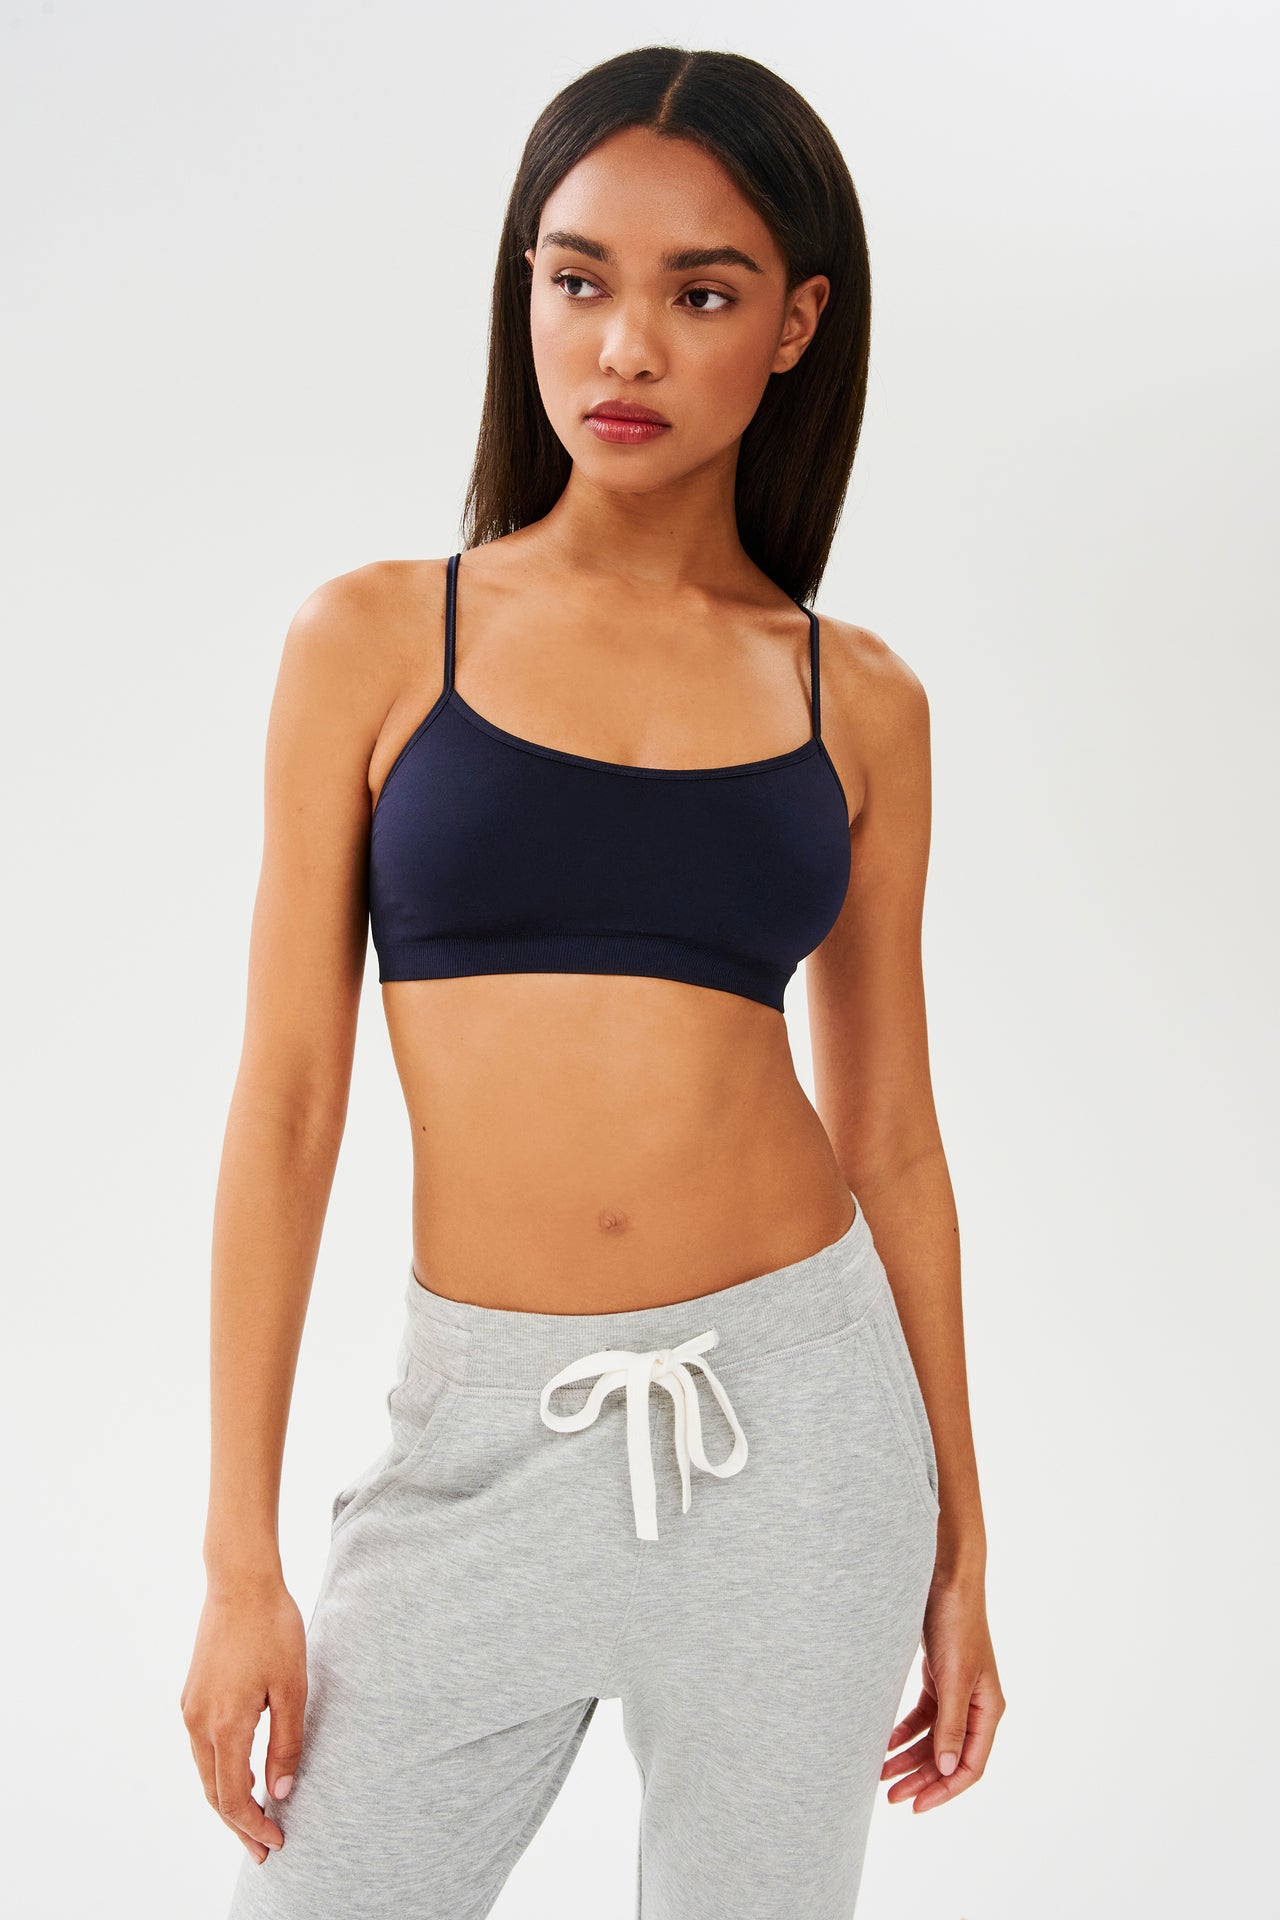 The model is wearing a Loren Seamless Bra in Indigo and grey sweatpants from SPLITS59, ideal for gym workouts.